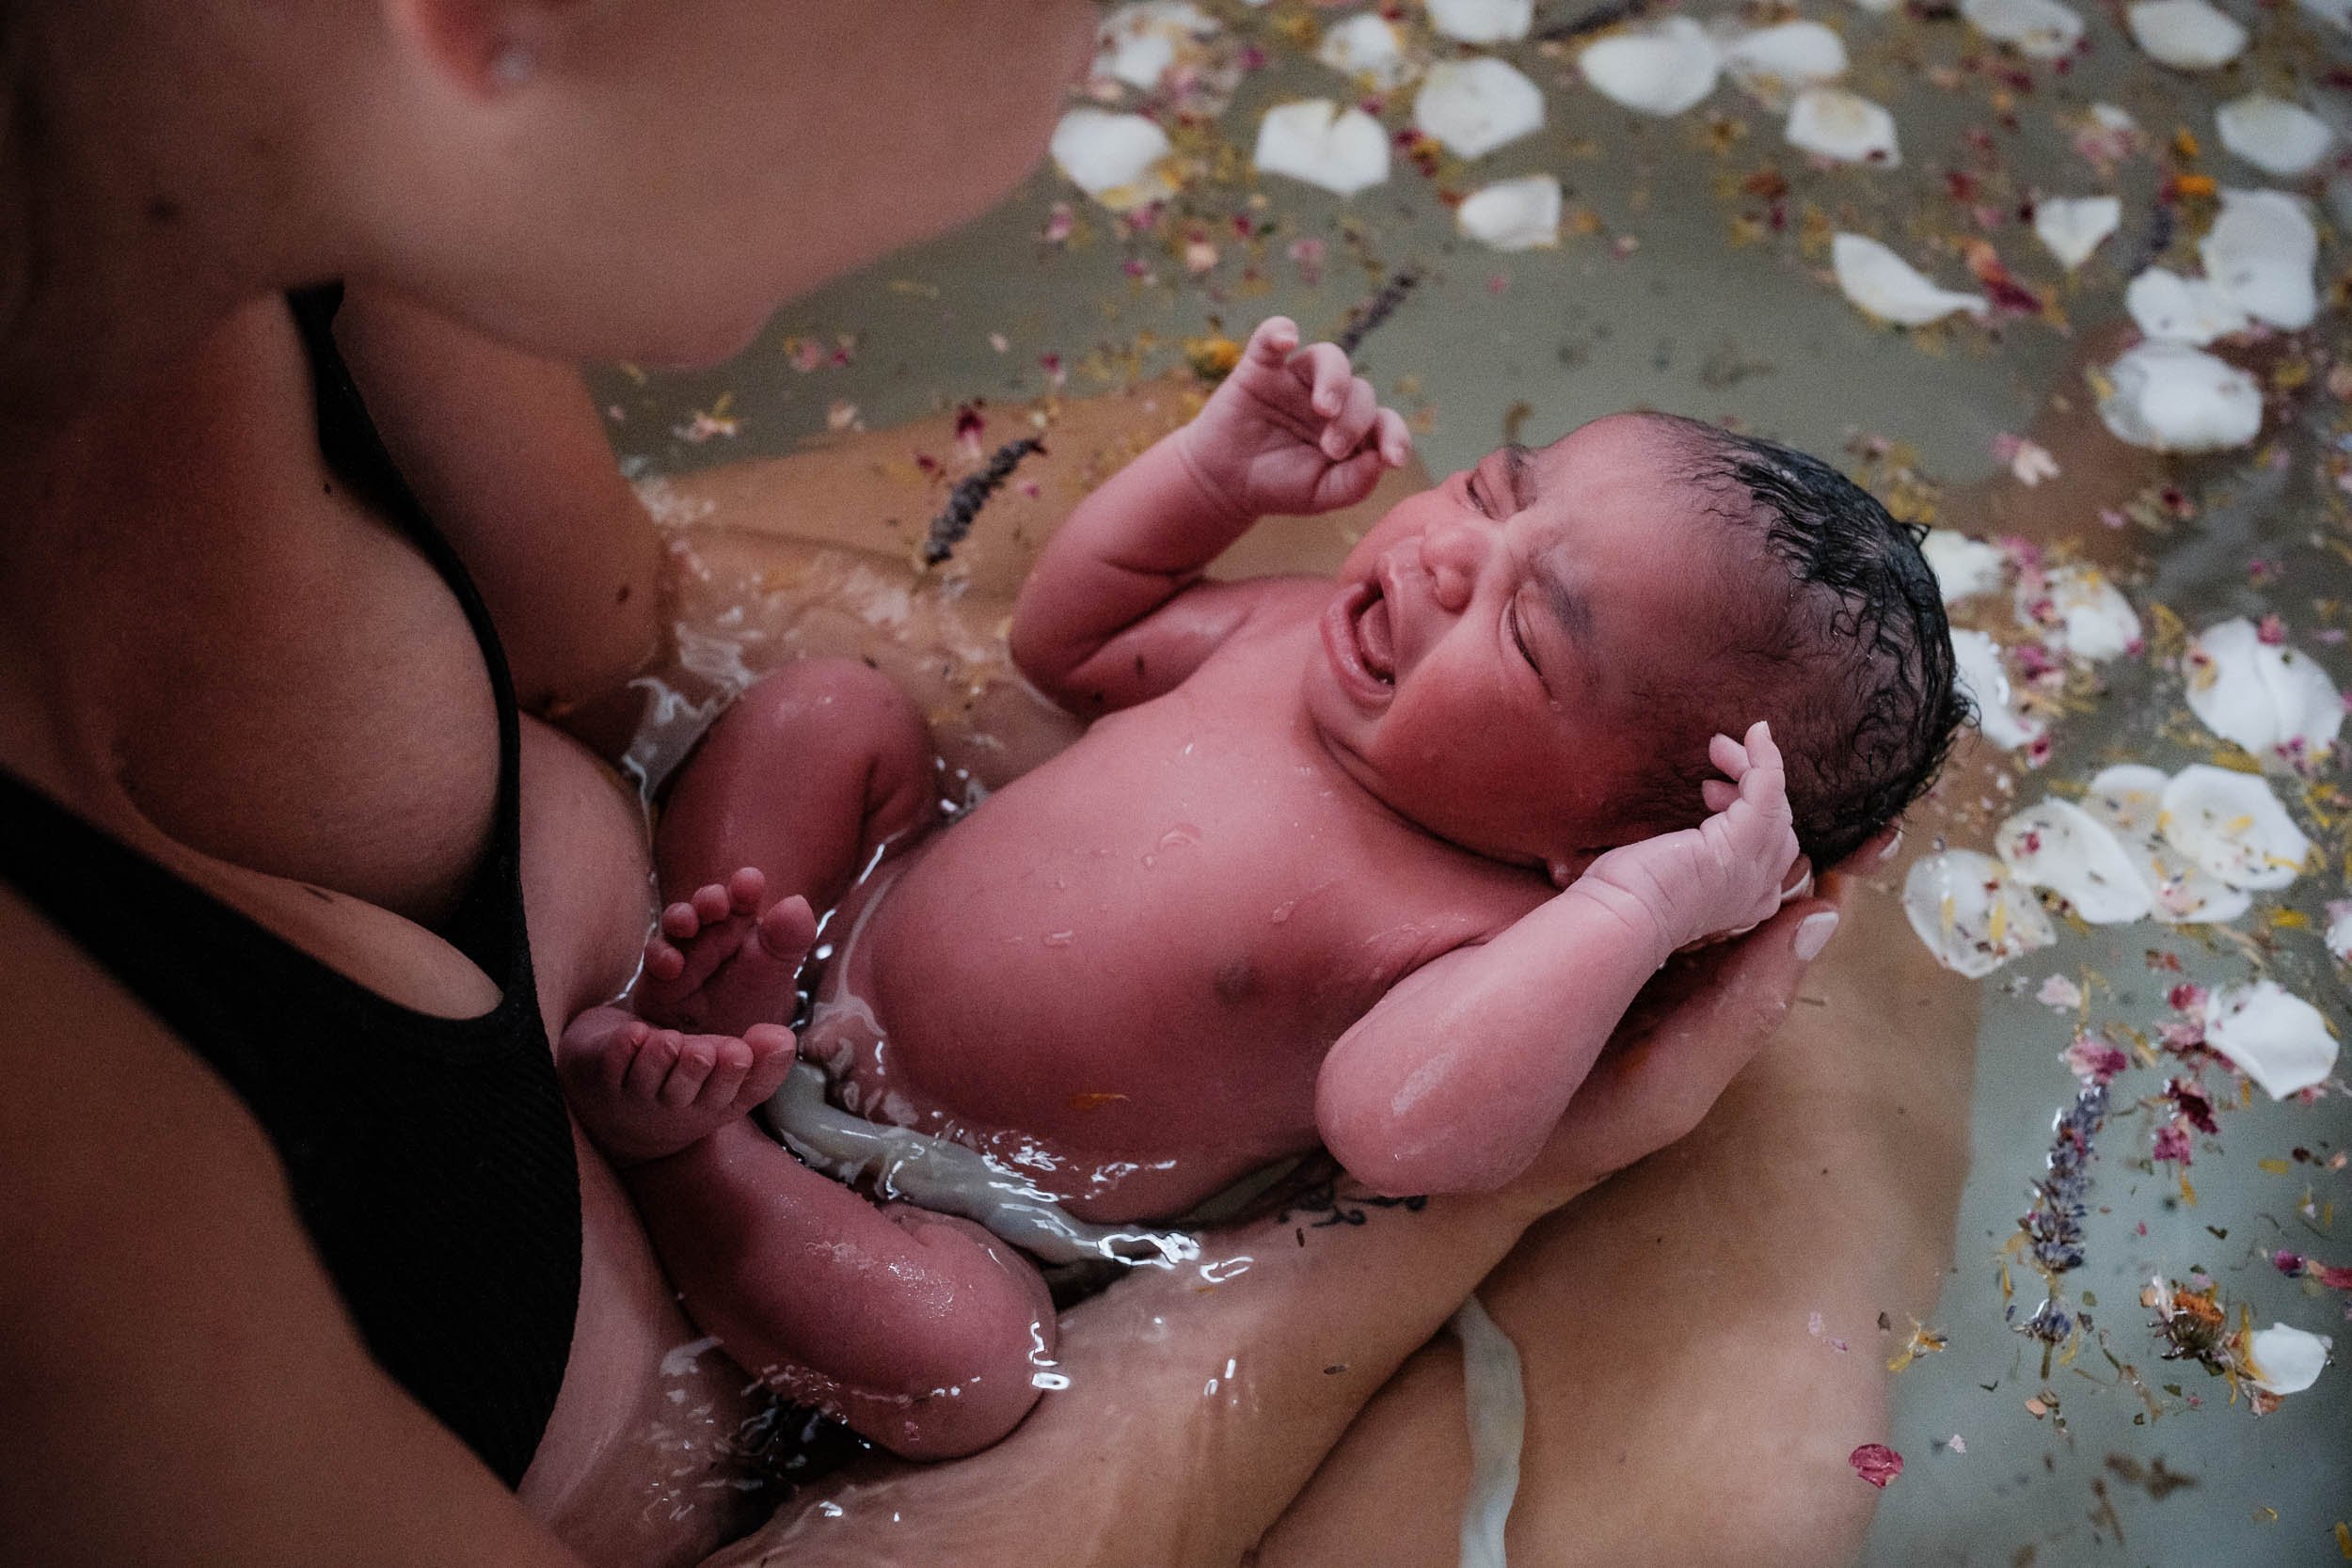 A newborn baby cries during an herbal bath after birth. Herbs and flower petals float around her in the tub.